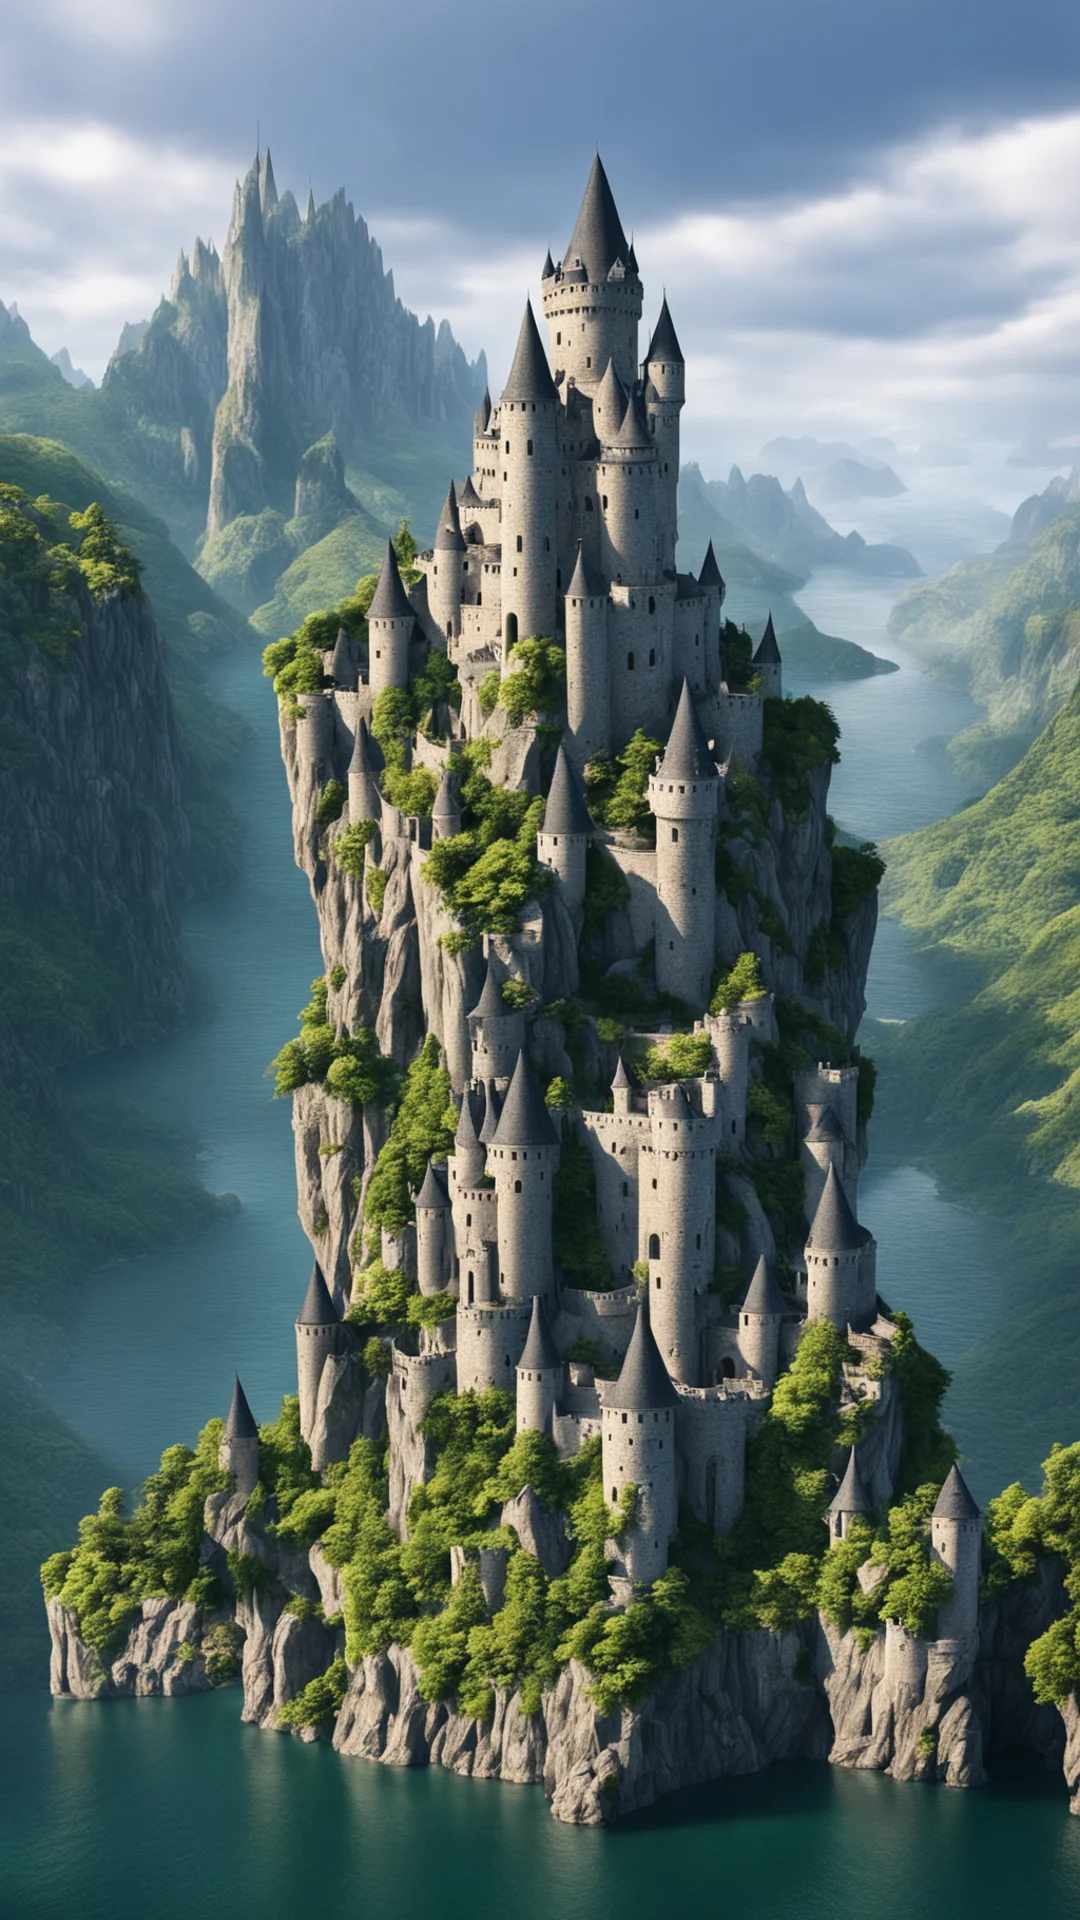 epic cliffs castle over lake large spiraling towers on castle epic shot realistic good looking trending fantastic 1 tall